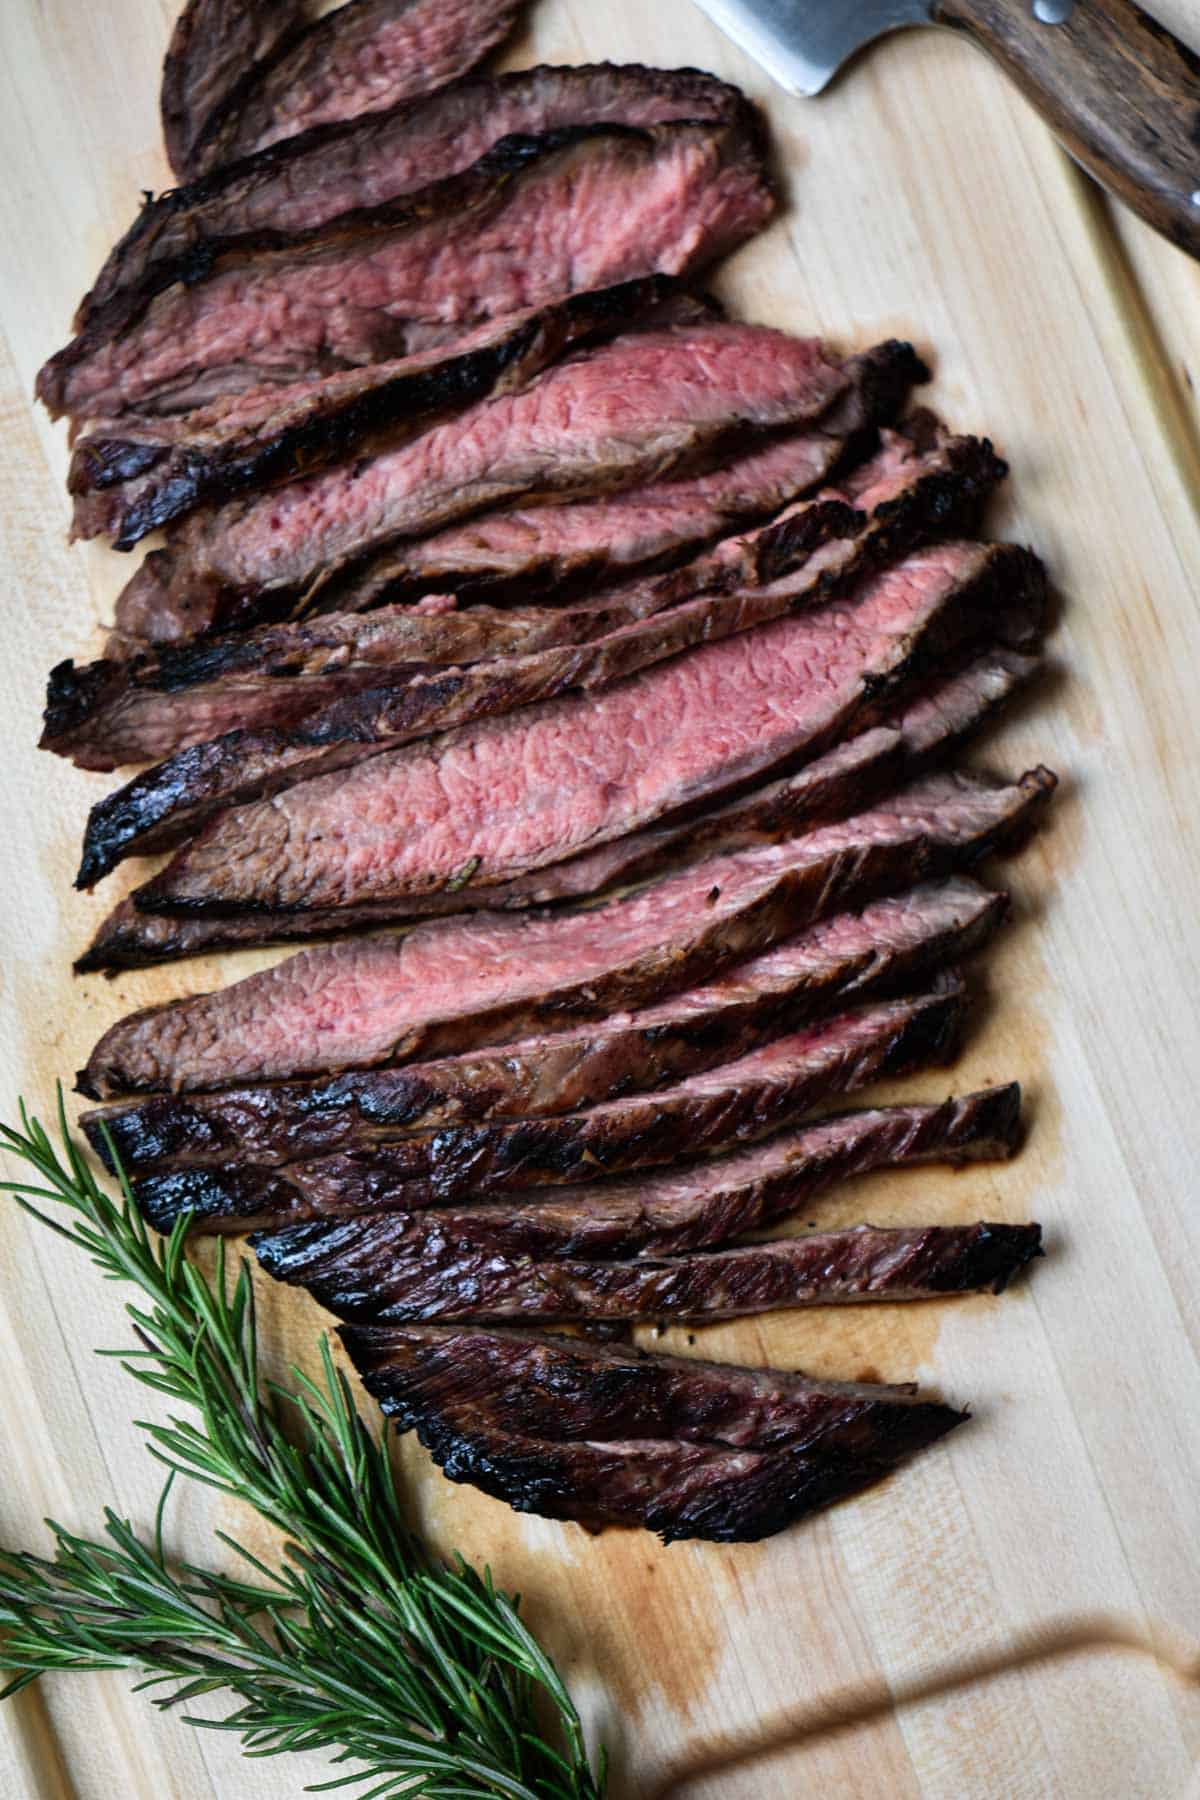 Marinated flank steak on a cutting board with rosemary.